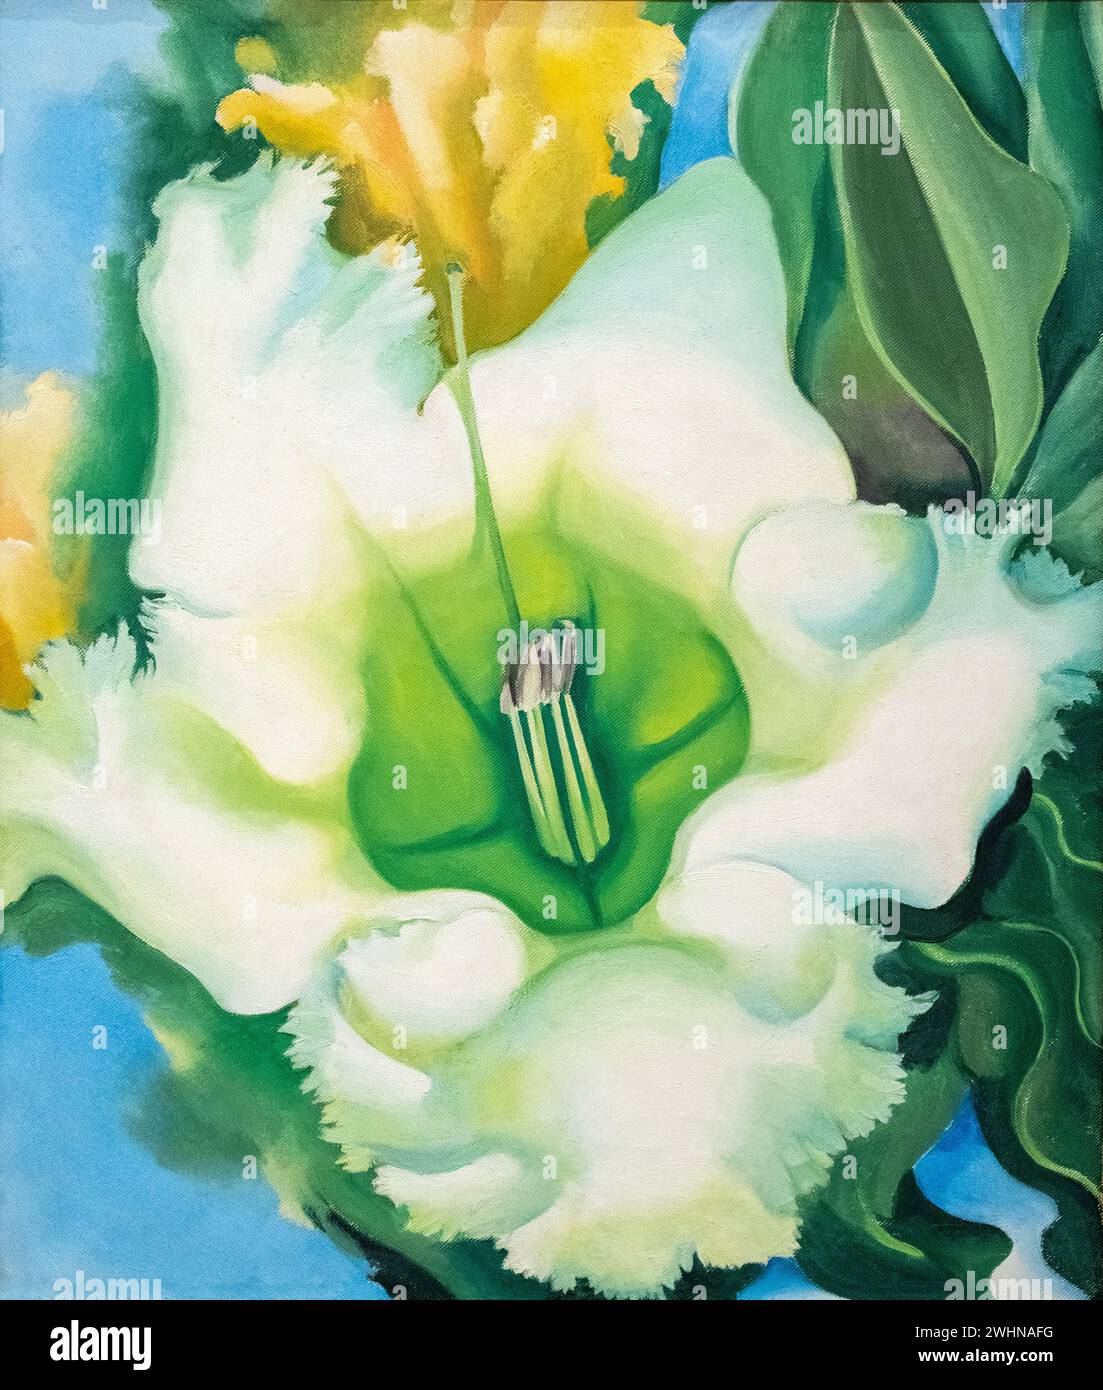 Georgia O'Keeffe 1939 huile sur toile peinture 'Cup of Silver Ginger' au Baltimore Museum of Art Banque D'Images